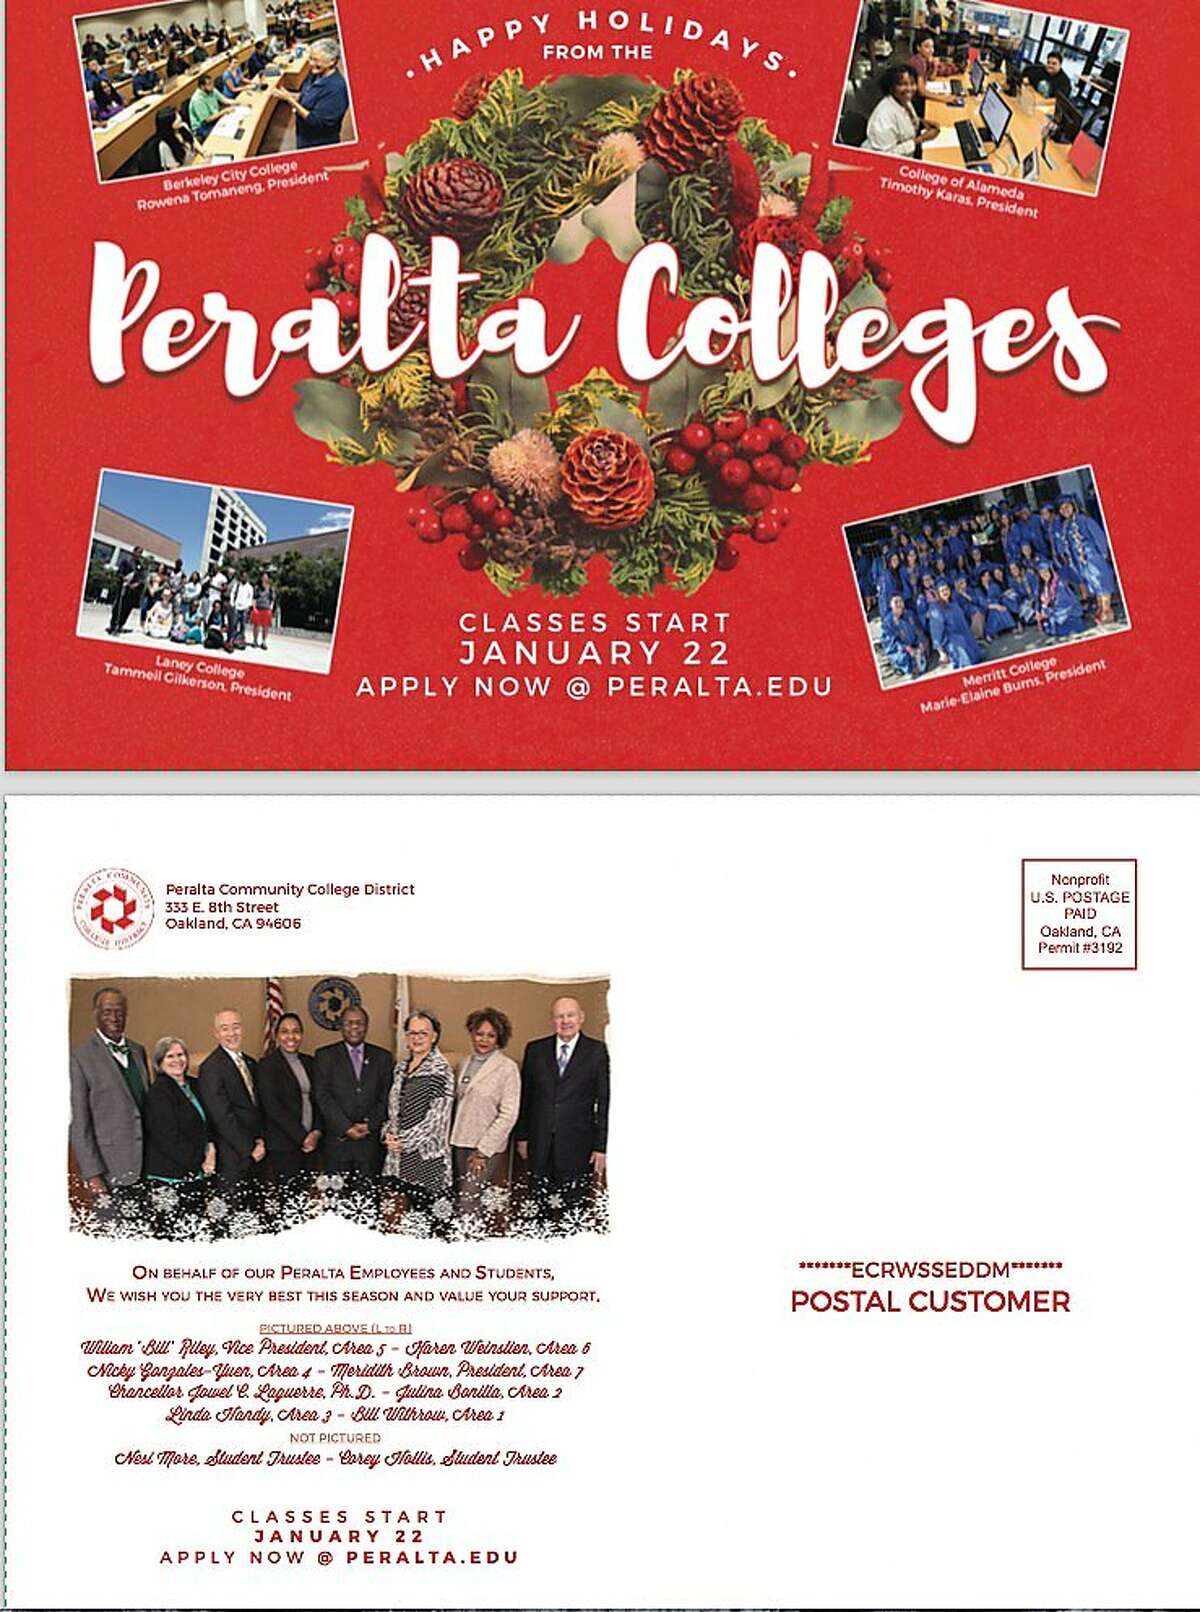 A state ethics commission fined the Peralta Community College District $2,000 for spending taxpayer money to send thousands of these holiday cards with images of the trustees and Chancellor Jowel Laguerre in 2017.